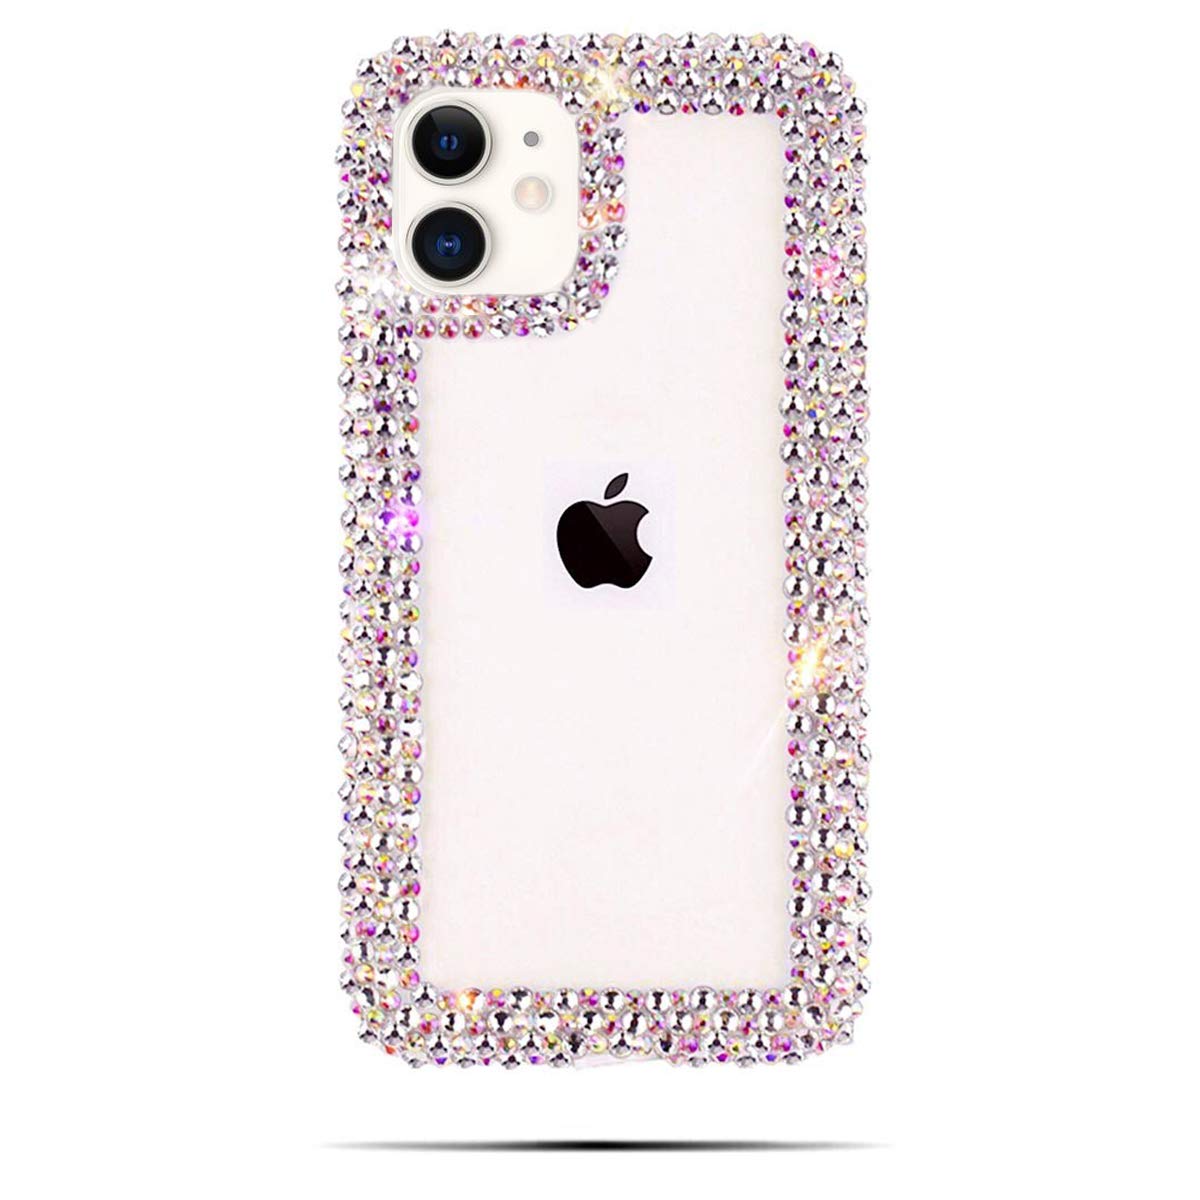 BONITEC Jesiya for iPhone 11, 3D Glitter Sparkle Bling Case Luxury Shiny Crystal Rhinestone Diamond Bumper Clear Protective Cover Clear for Women